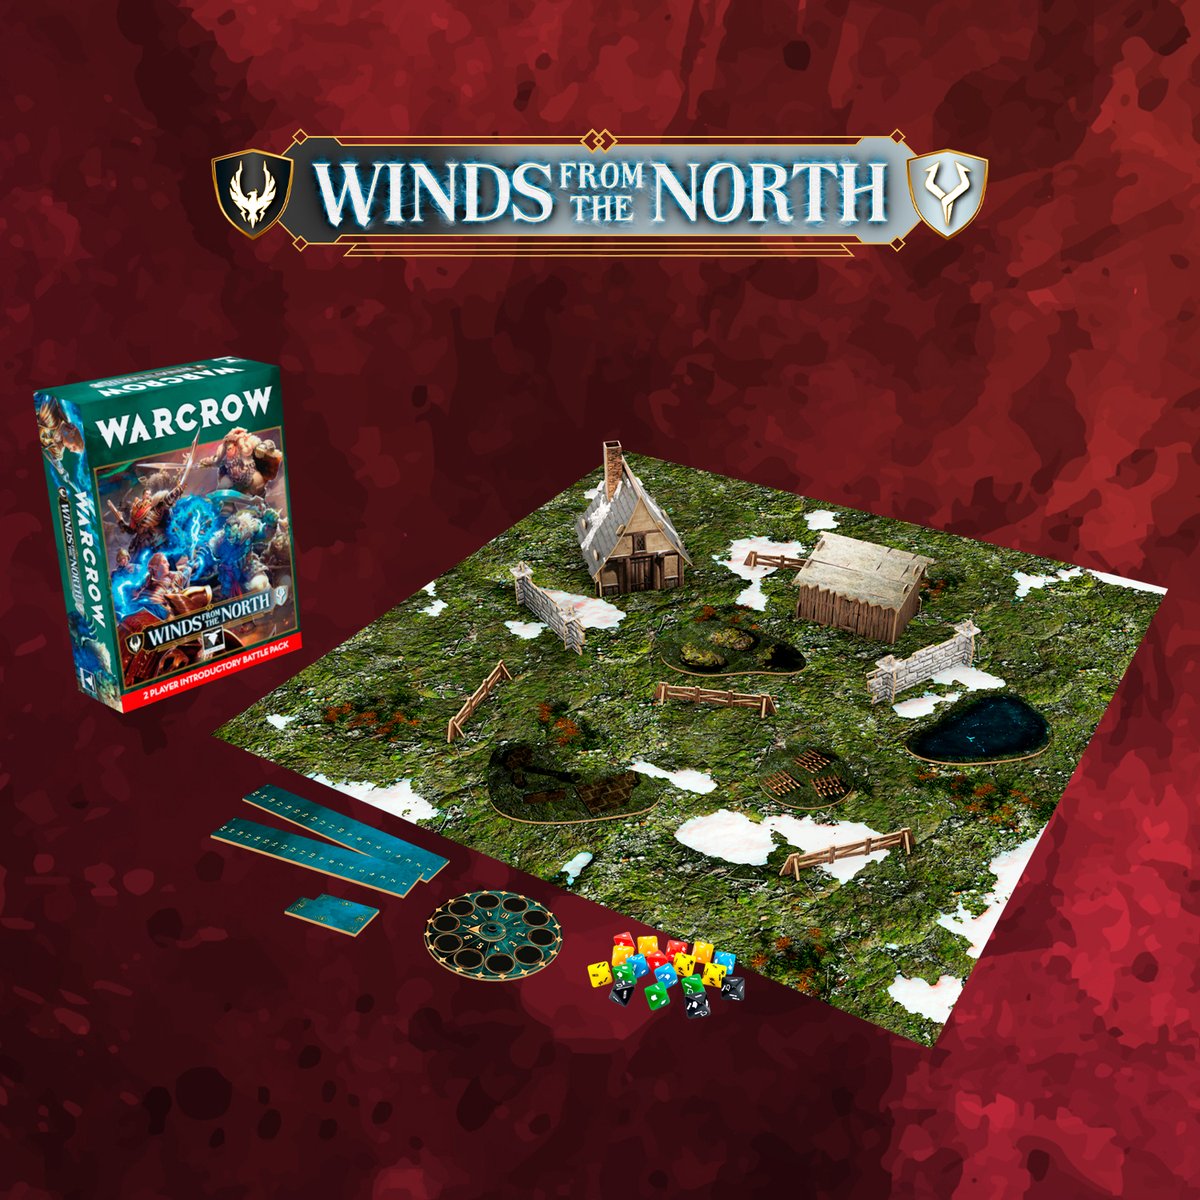 La preventa de Winds from the North, primera caja de Warcrow, tendrá lugar del 15 de julio al 4 de agosto. ¡No queda nada! --- The pre-order of Winds from the North, Warcrow's first battle box, will take place from July 15 to August 4. There's nothing left!